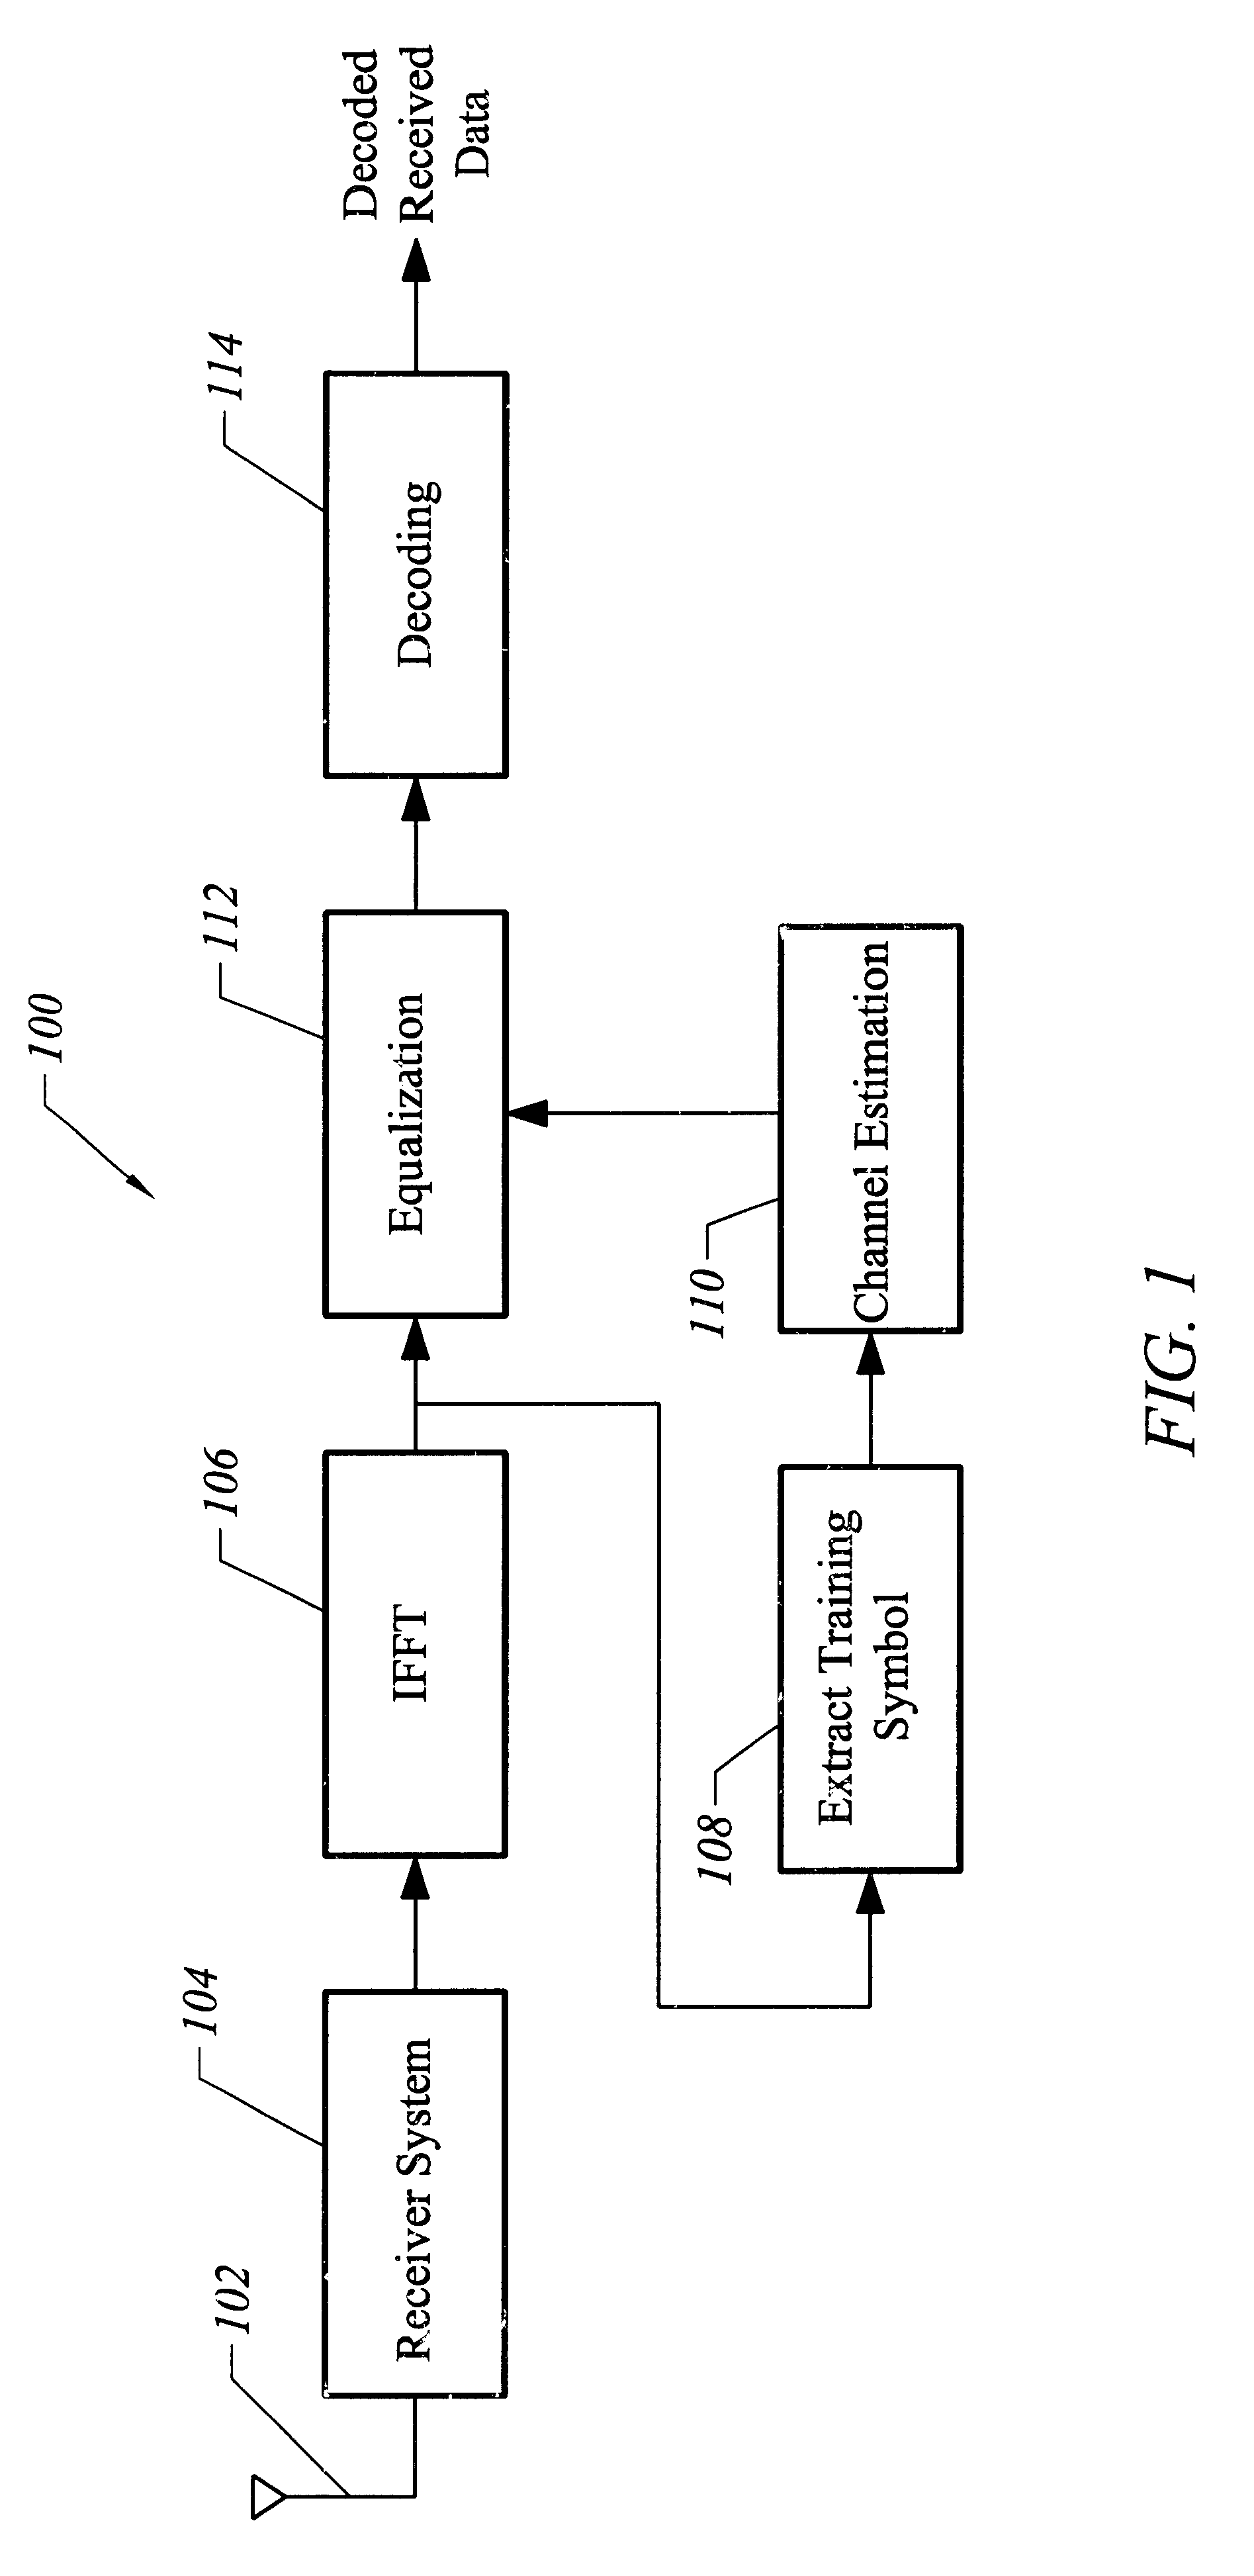 OFDM channel estimation in the presence of interference